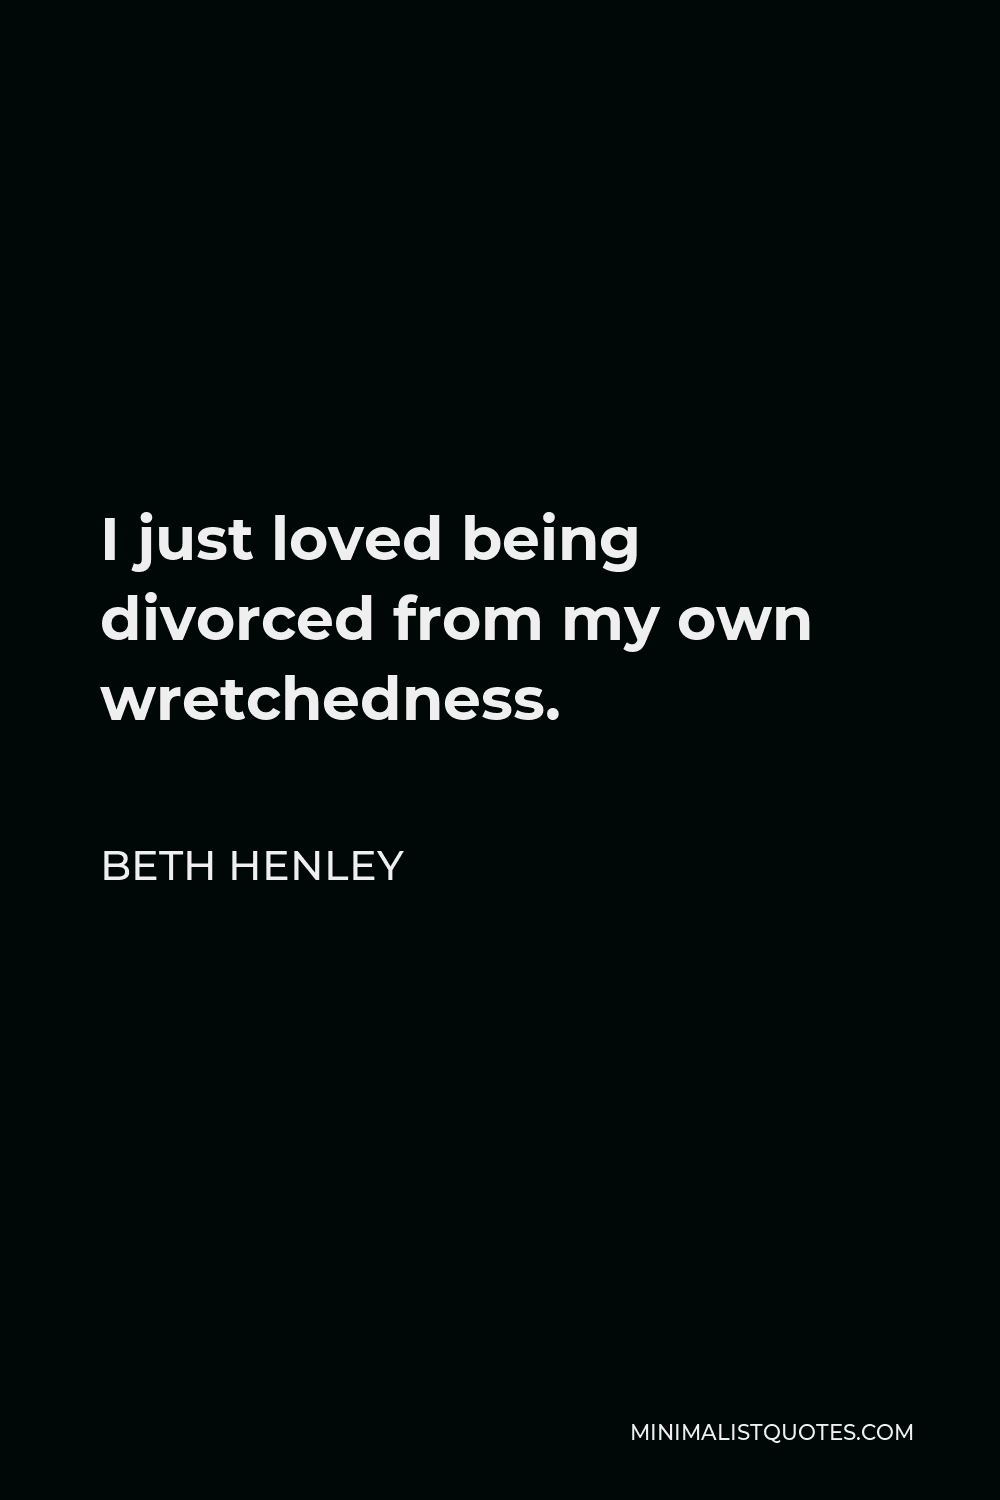 Beth Henley Quote - I just loved being divorced from my own wretchedness.